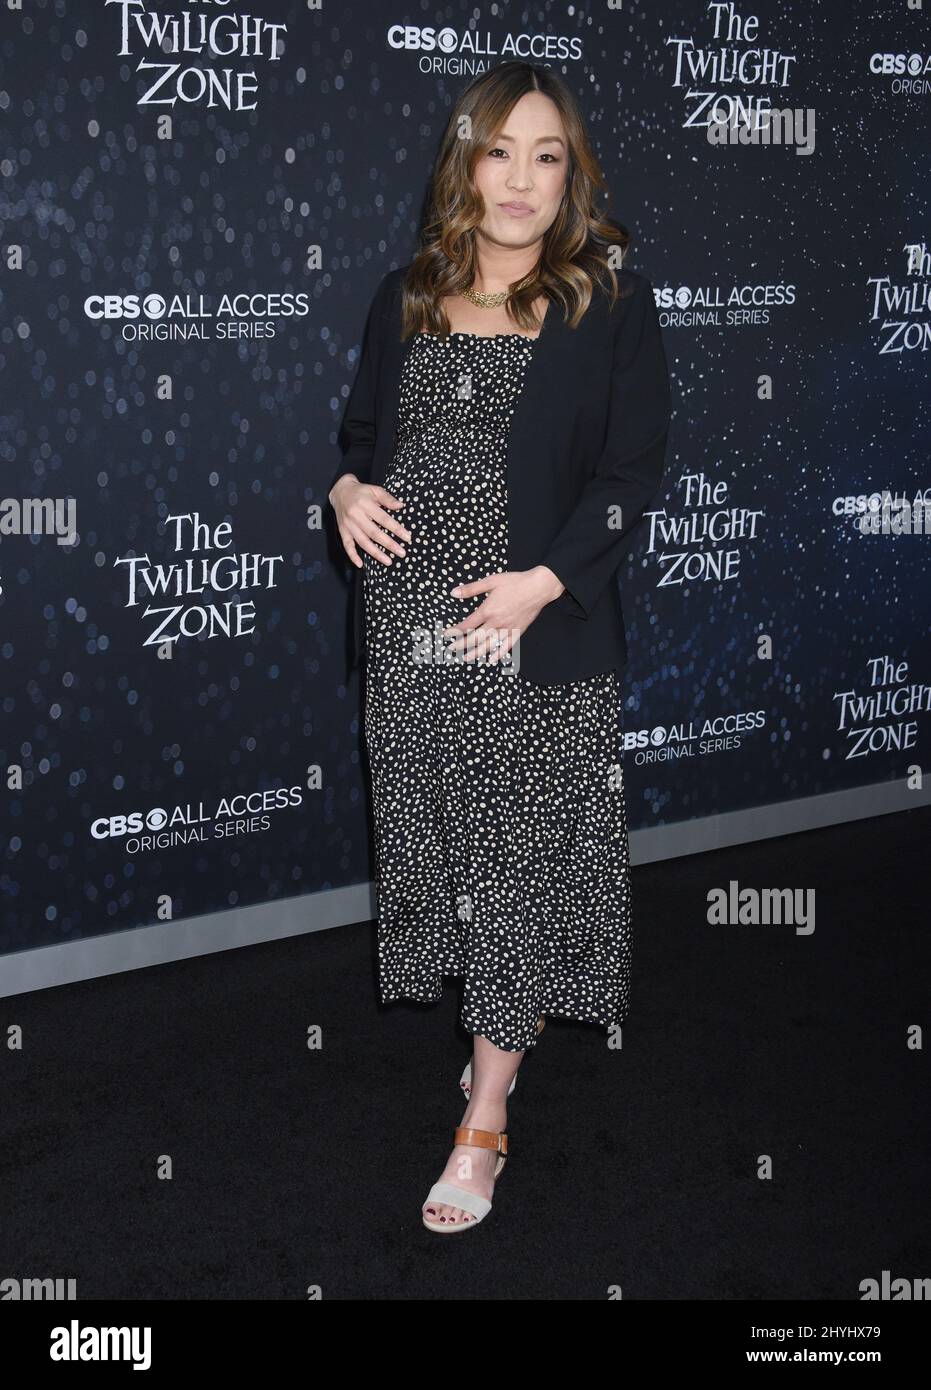 Audrey Chon nimmt an der Premiere Party „The Twilight Zone“ in Los Angeles Teil Stockfoto